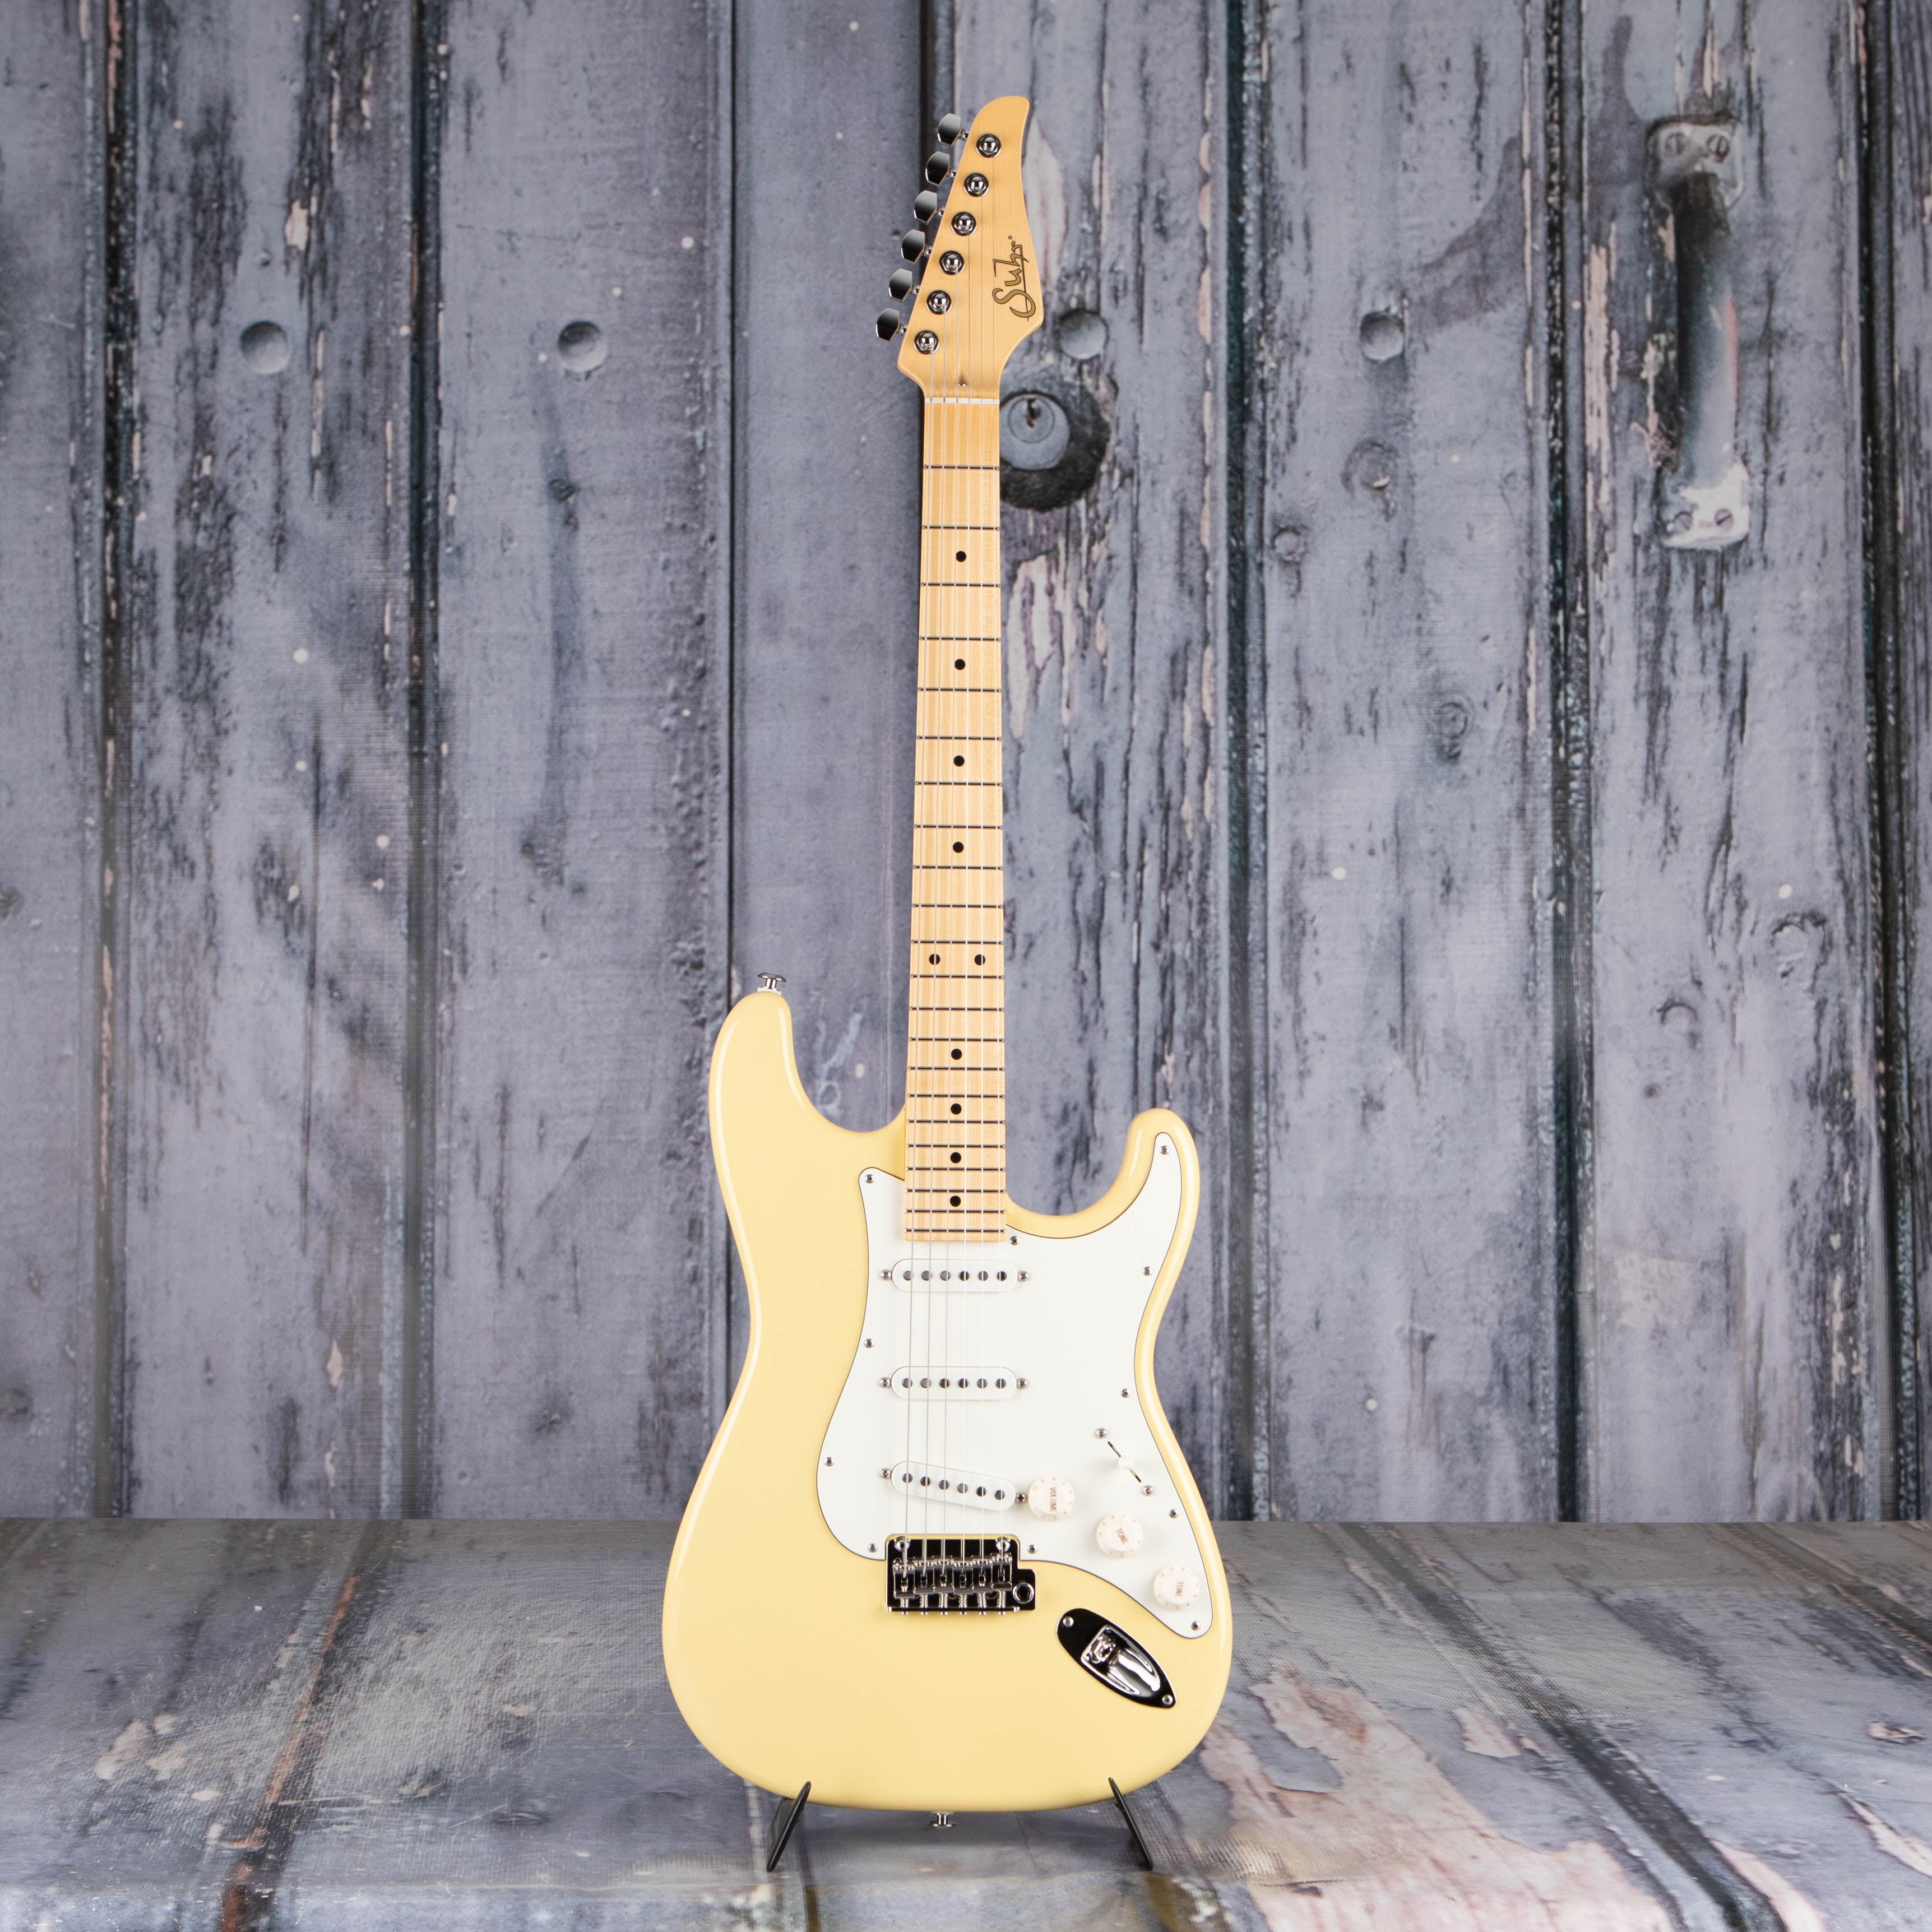 Suhr Classic S Electric Guitar, SSS, Vintage Yellow, front